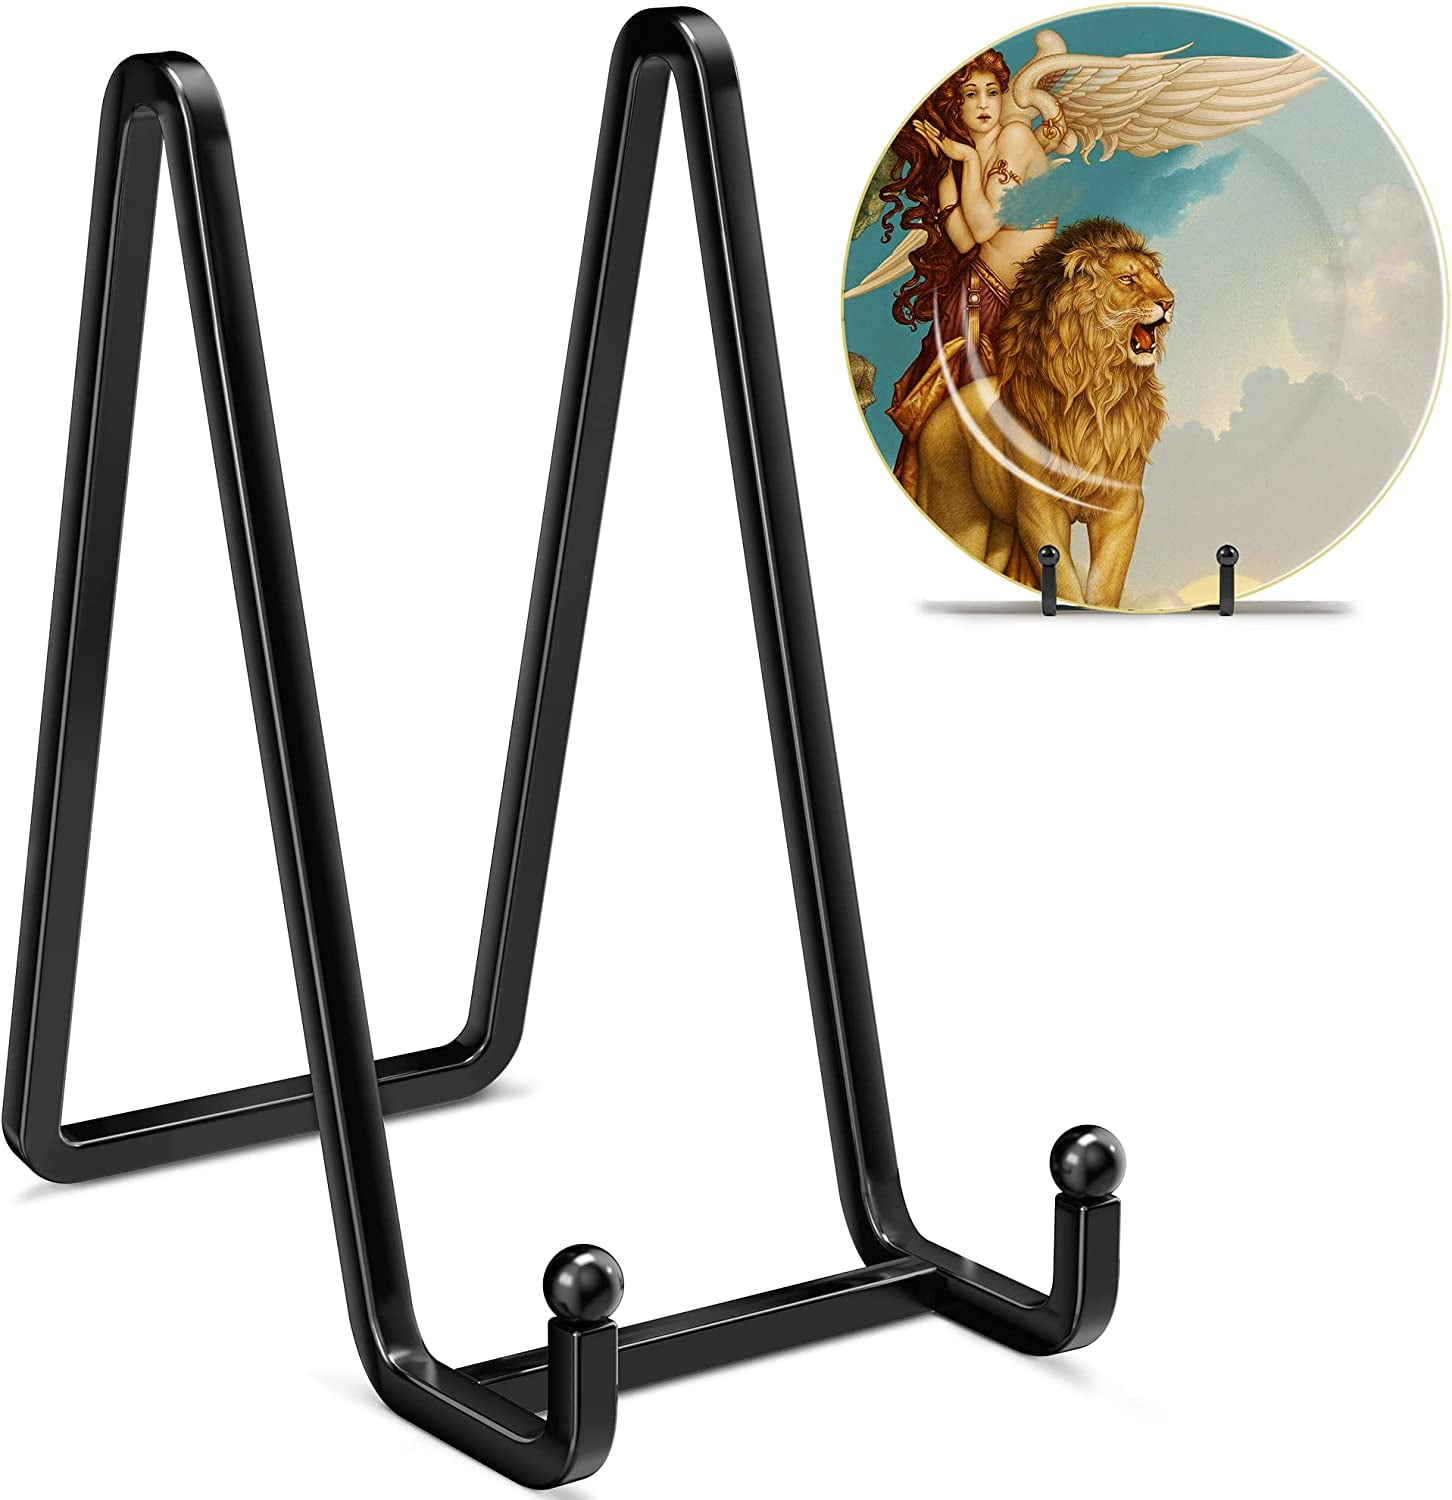 Yirtree Plate Stands for Display - 3/4/5 PCS Metal Square Wire Plate Holder  Display Stand + Picture Frame Stand Holder Easel for Book, Decorative